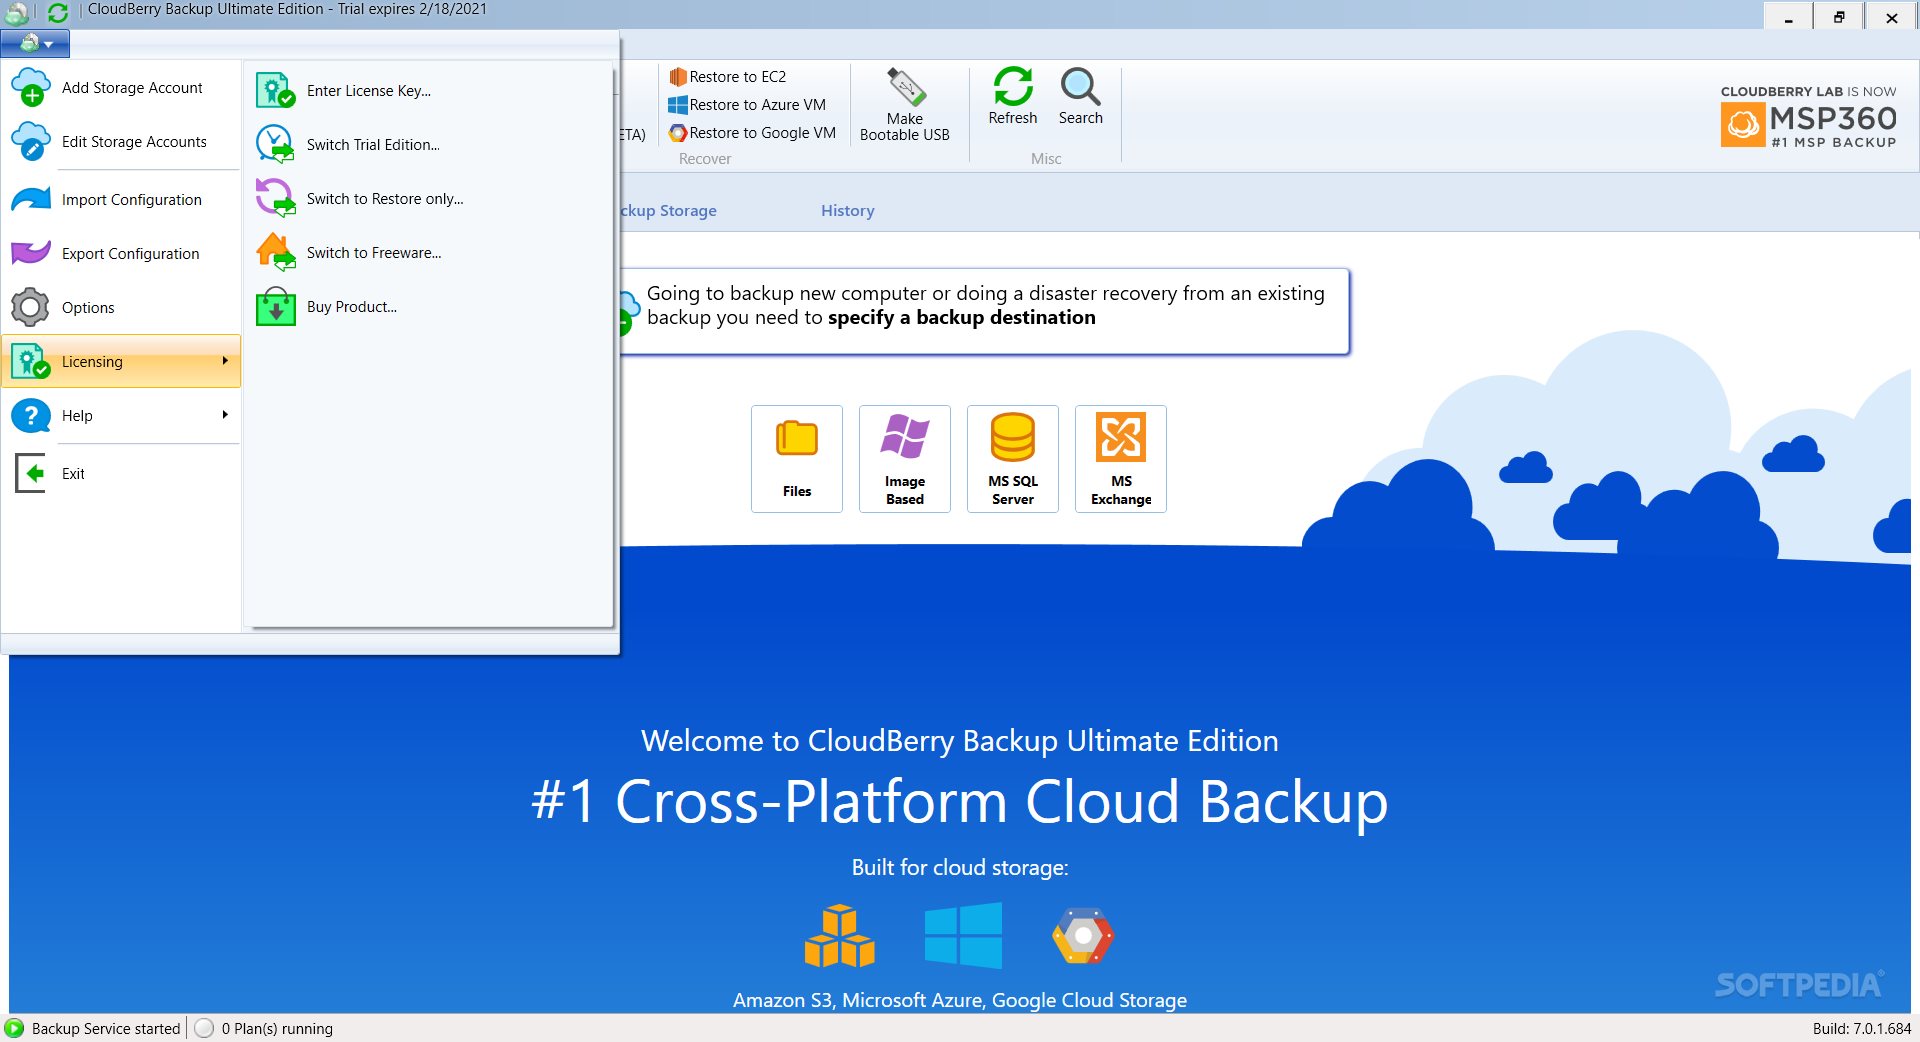 where are cloudberry backup configurations stored